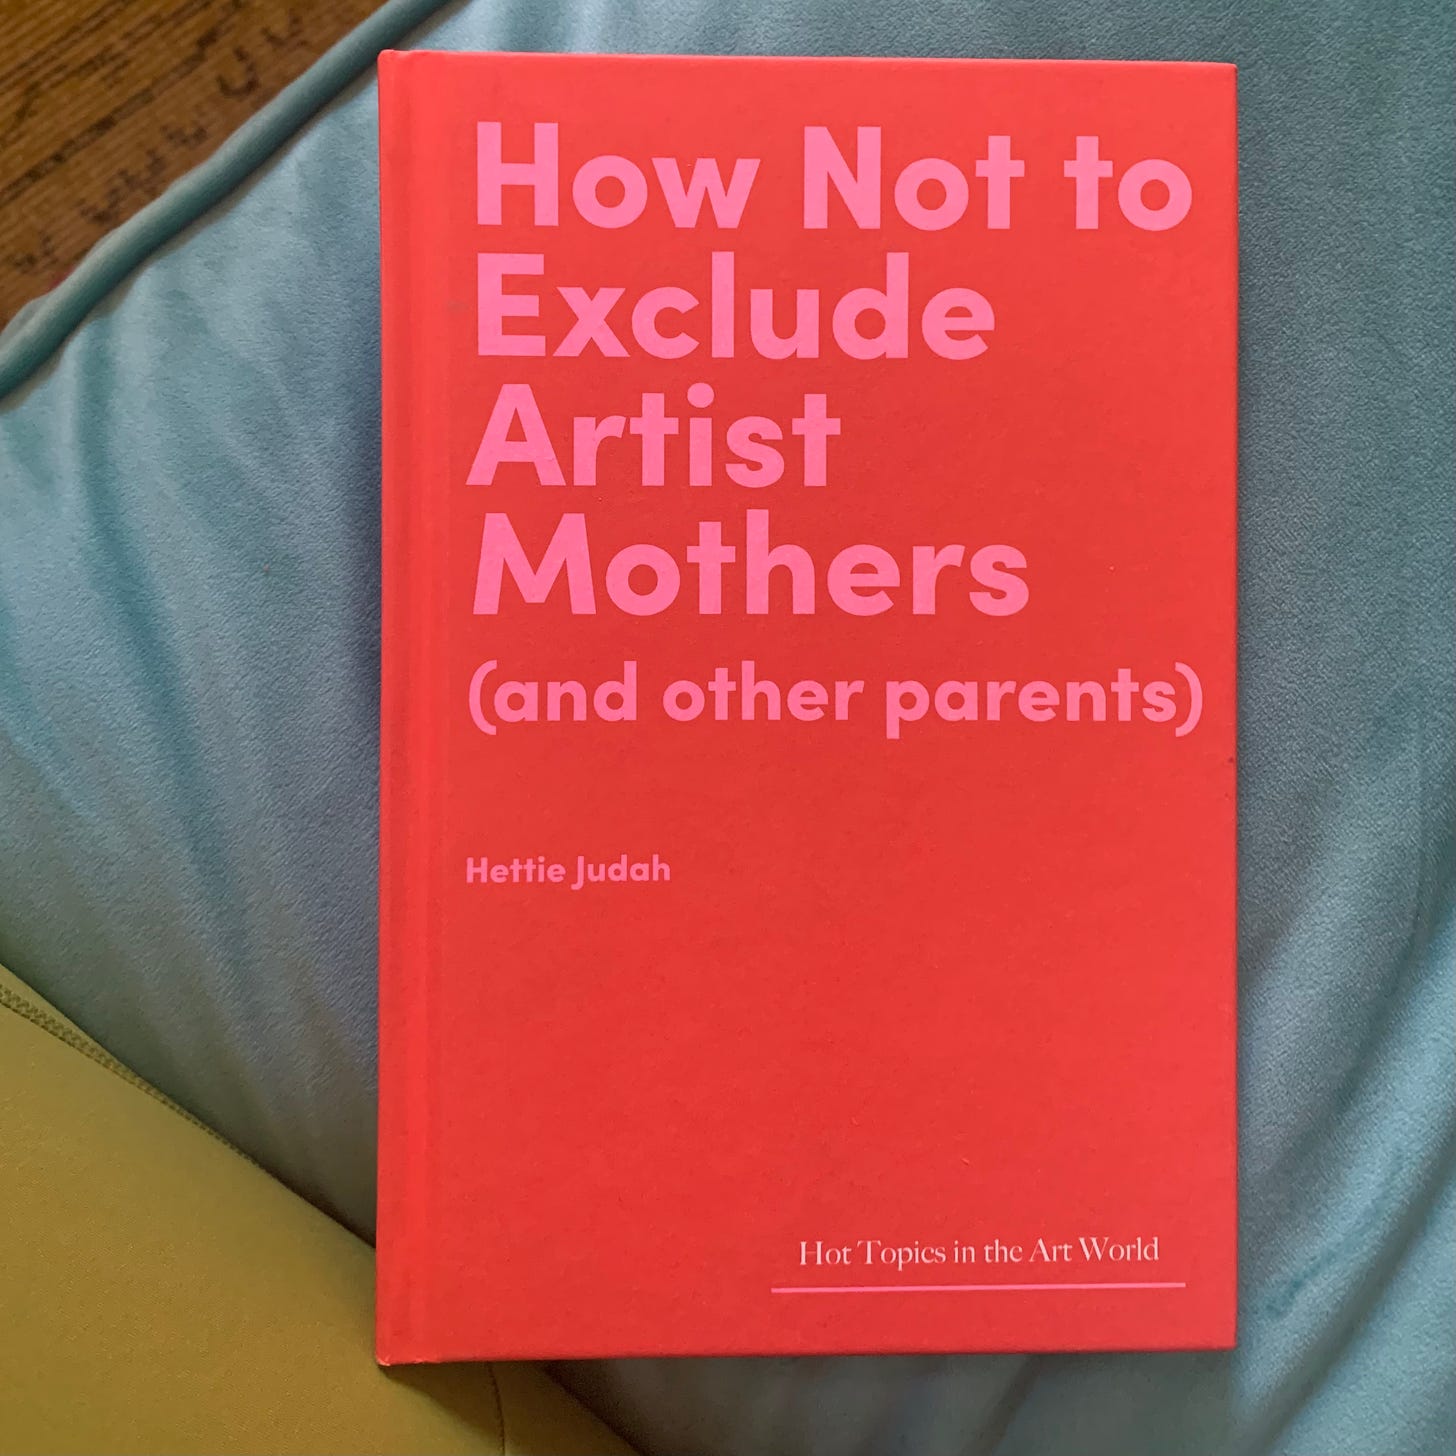 How Not To Exclude Artist Mothers (And Other People) by Hettie Judah, photo of red and pink book cover